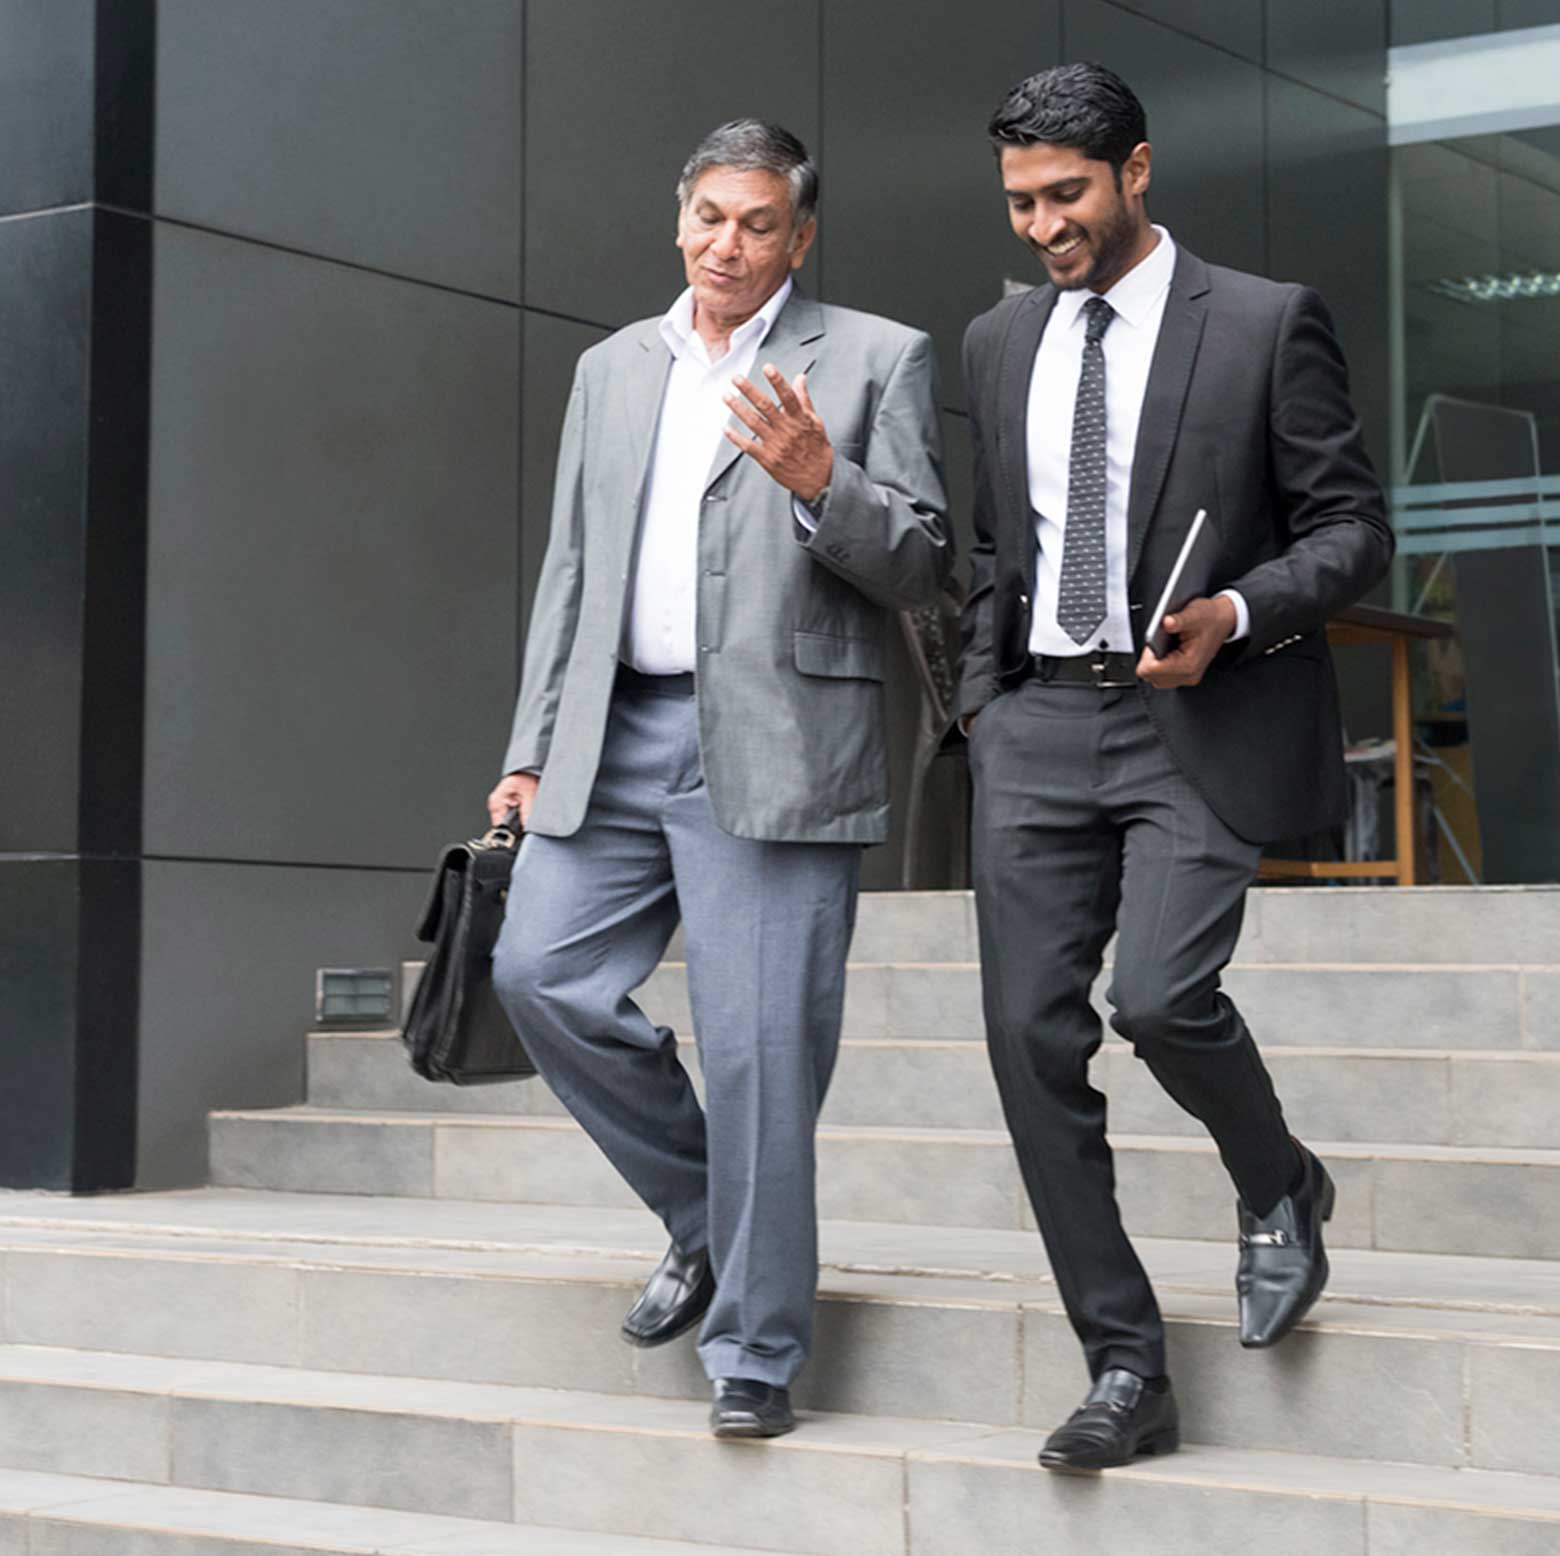 Two male business colleagues wearing suits and walking down the stairs outside an office building